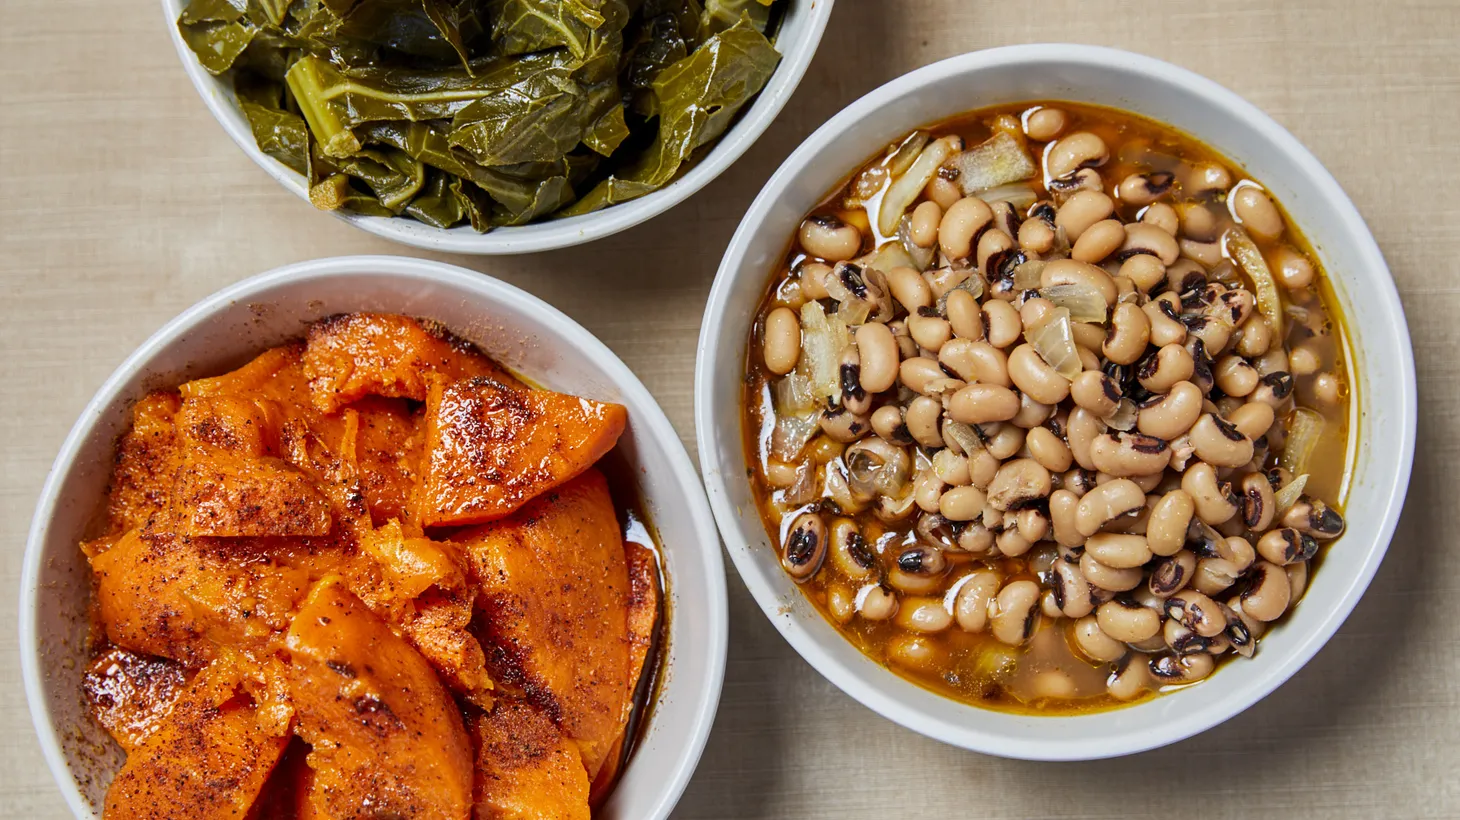 Black eyed peas, collard greens, and sweet potatoes are just some of the comfort food on offer at Dulan’s Soul Food, an LA institution.